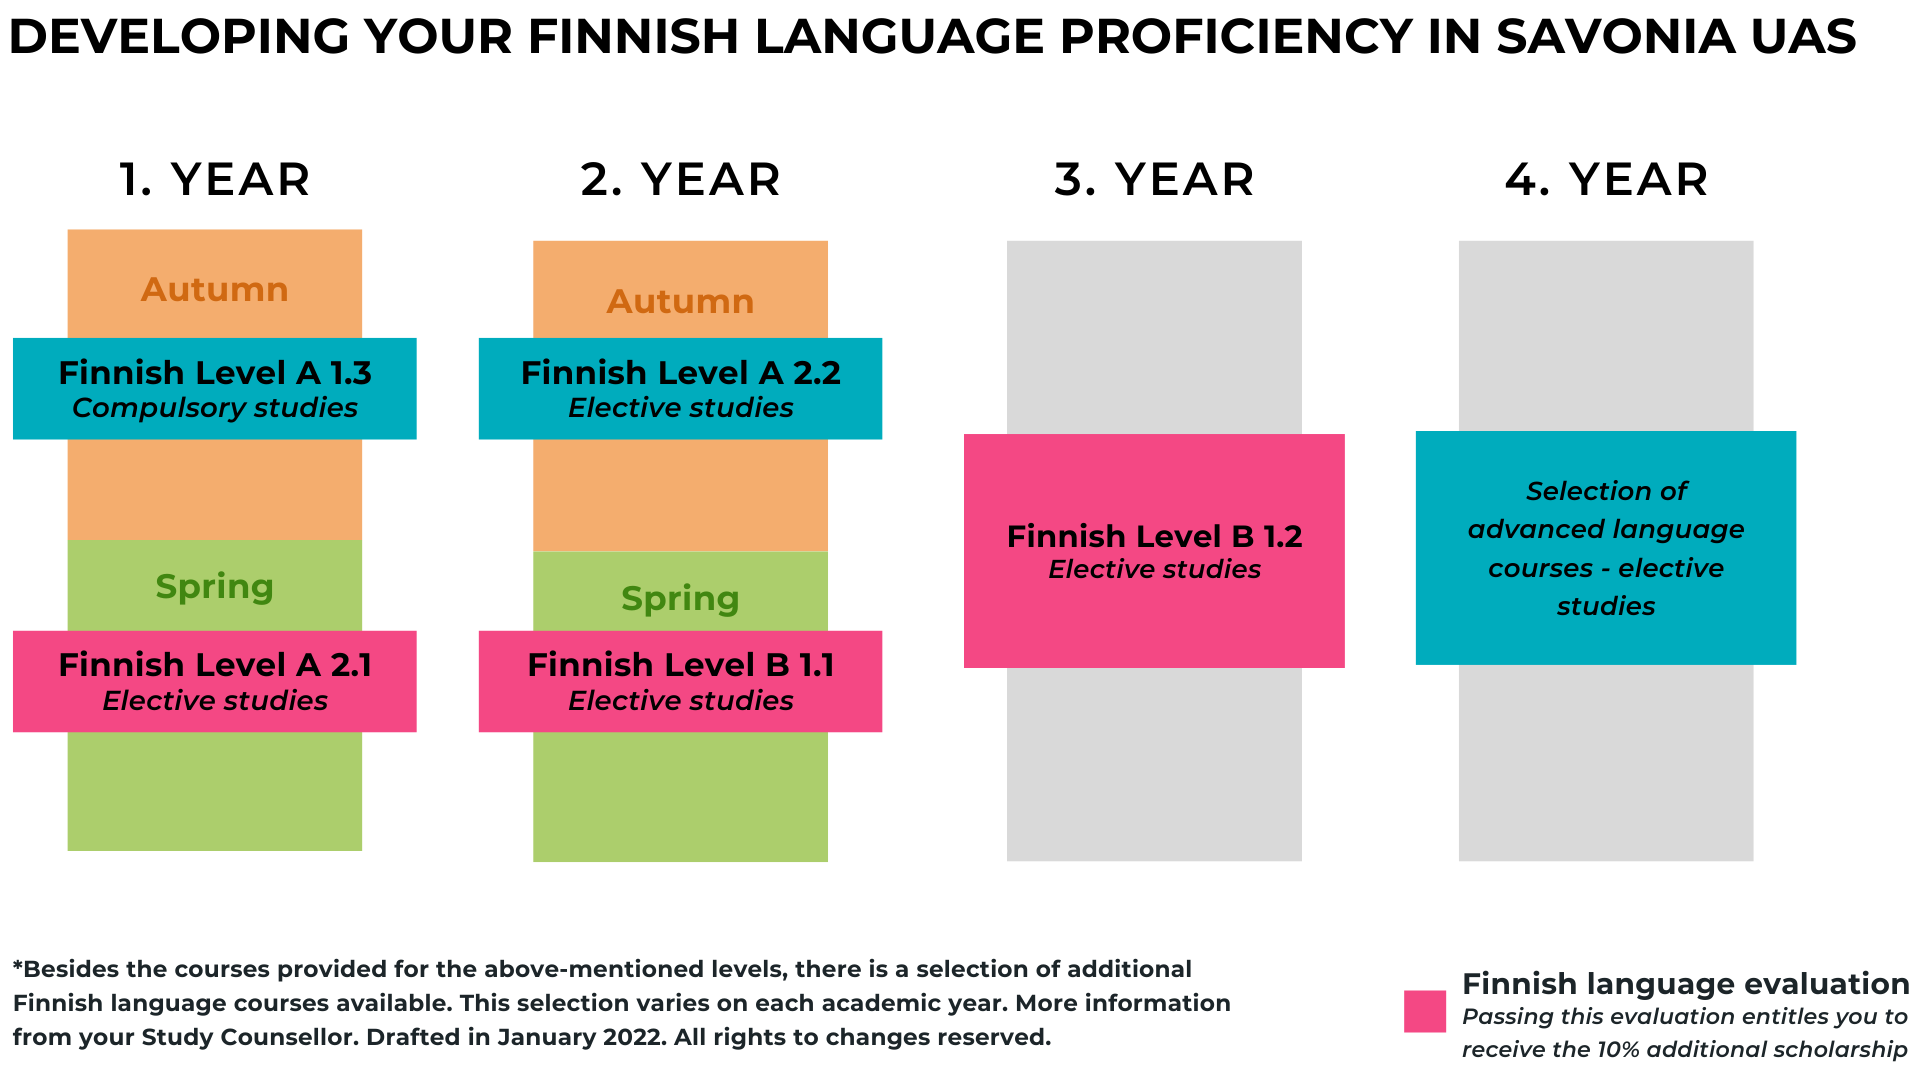 Table describing the Finnish language levels and points of evaluation